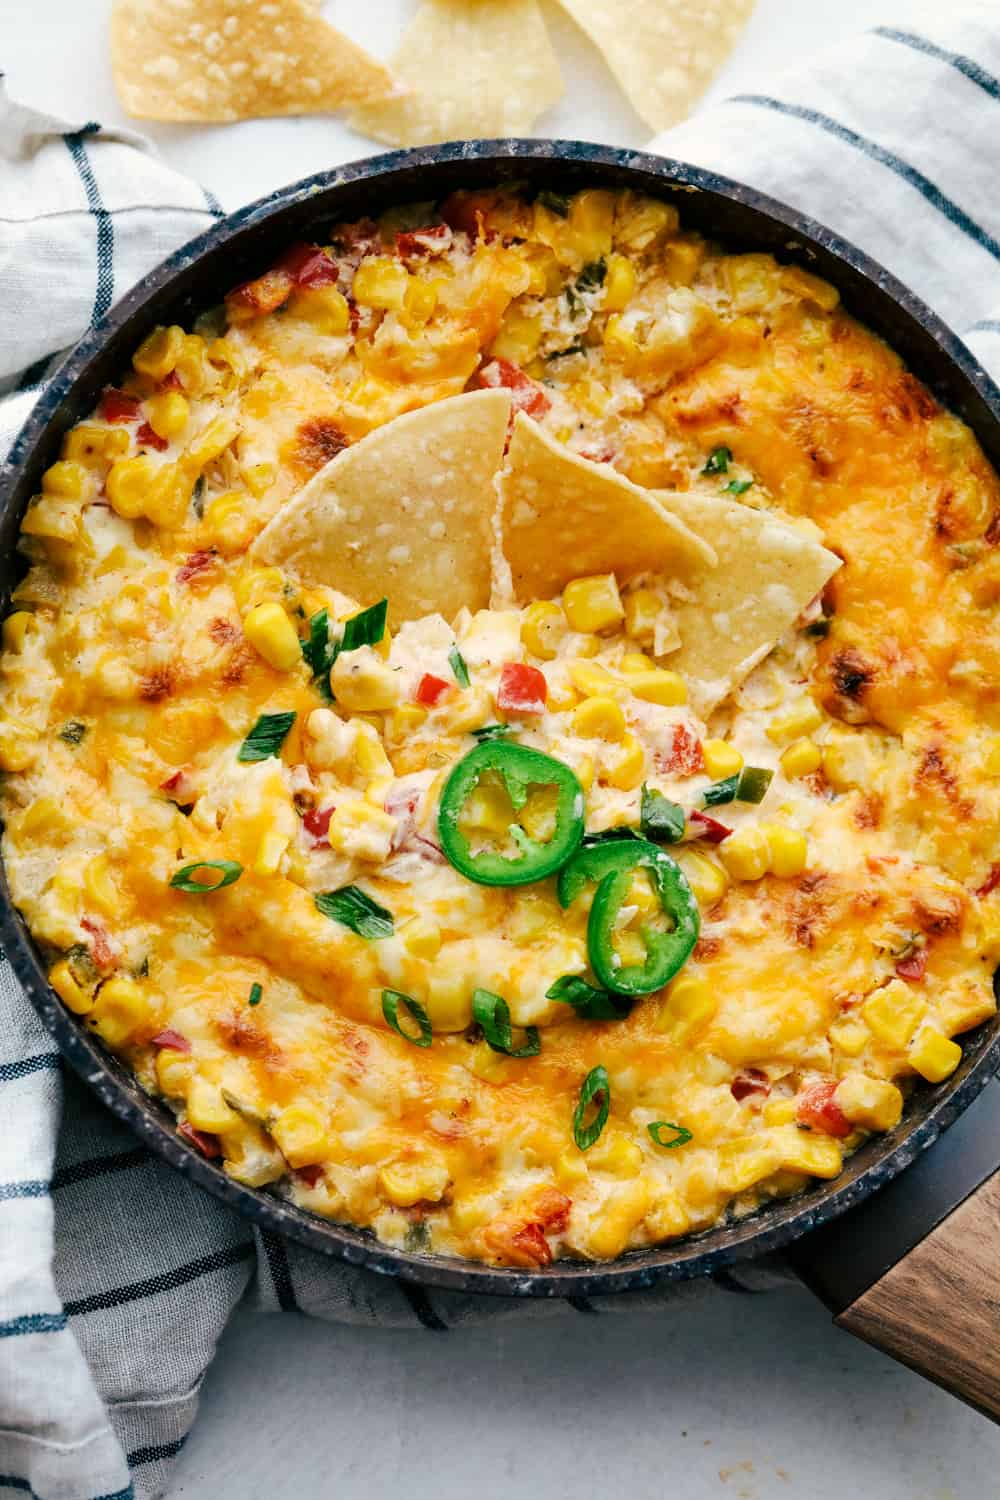 Hot Corn Dip with onions, peppers, jalapeno and ooey gooey cheese, served with corn chips.